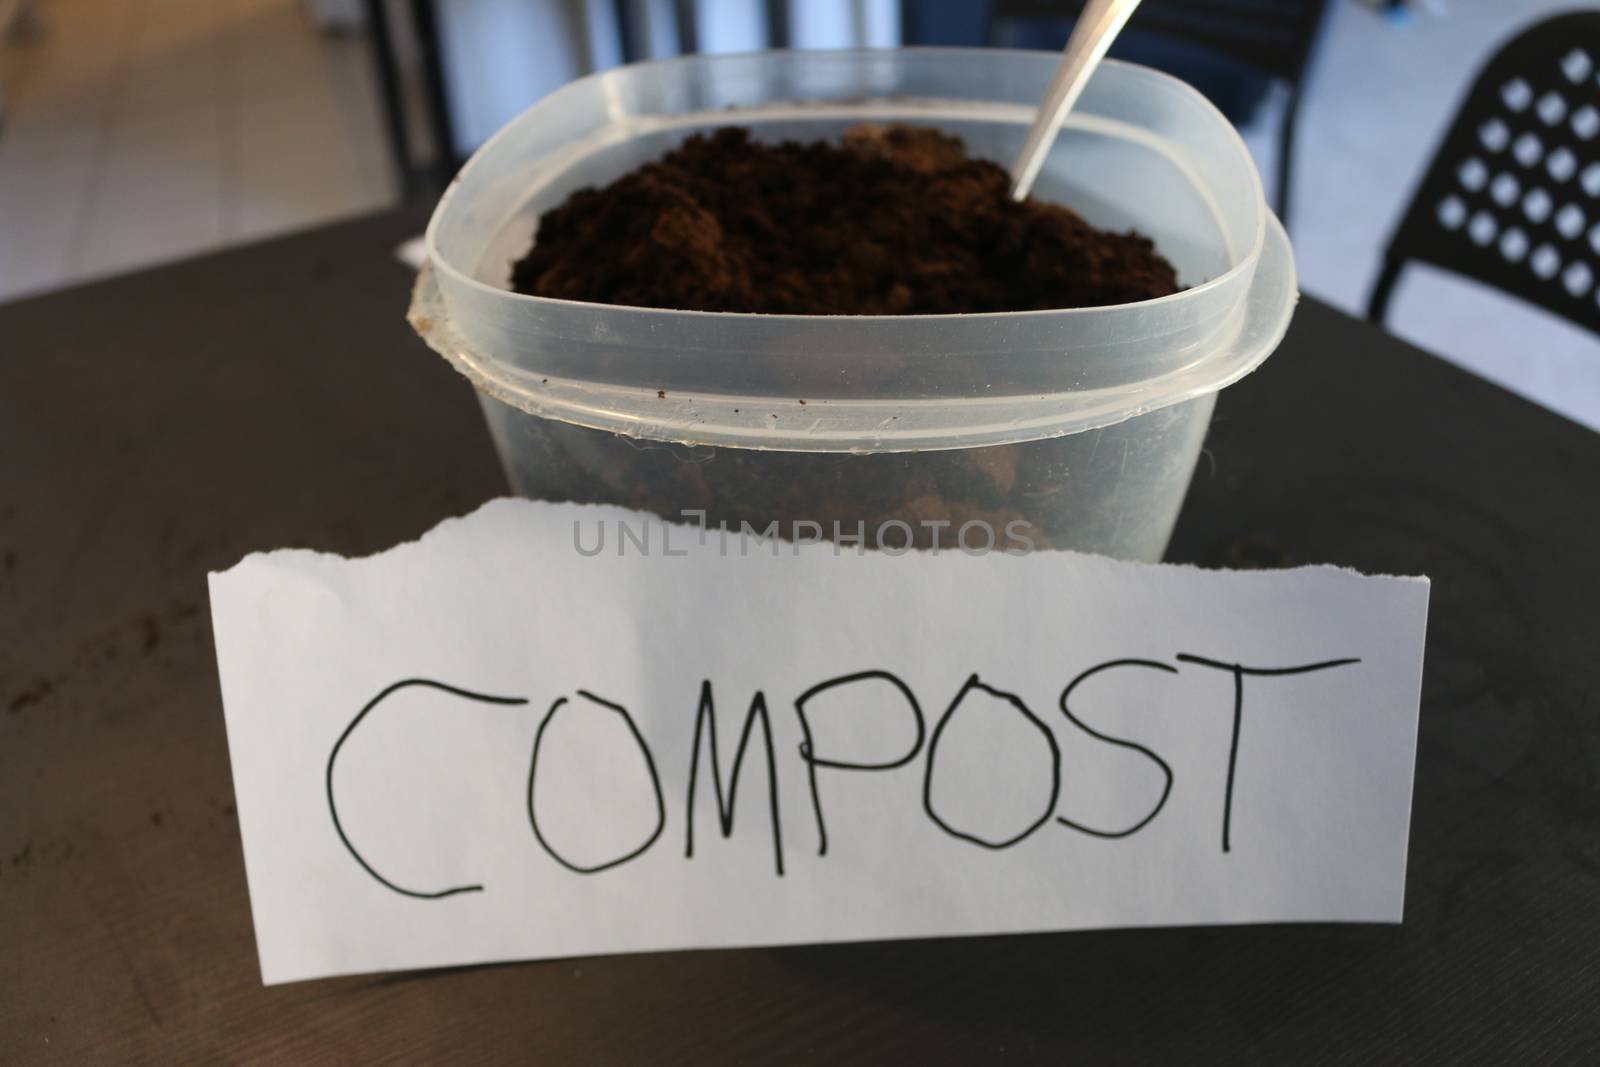 Photo of a container of used coffee grounds with a sign that says compost.